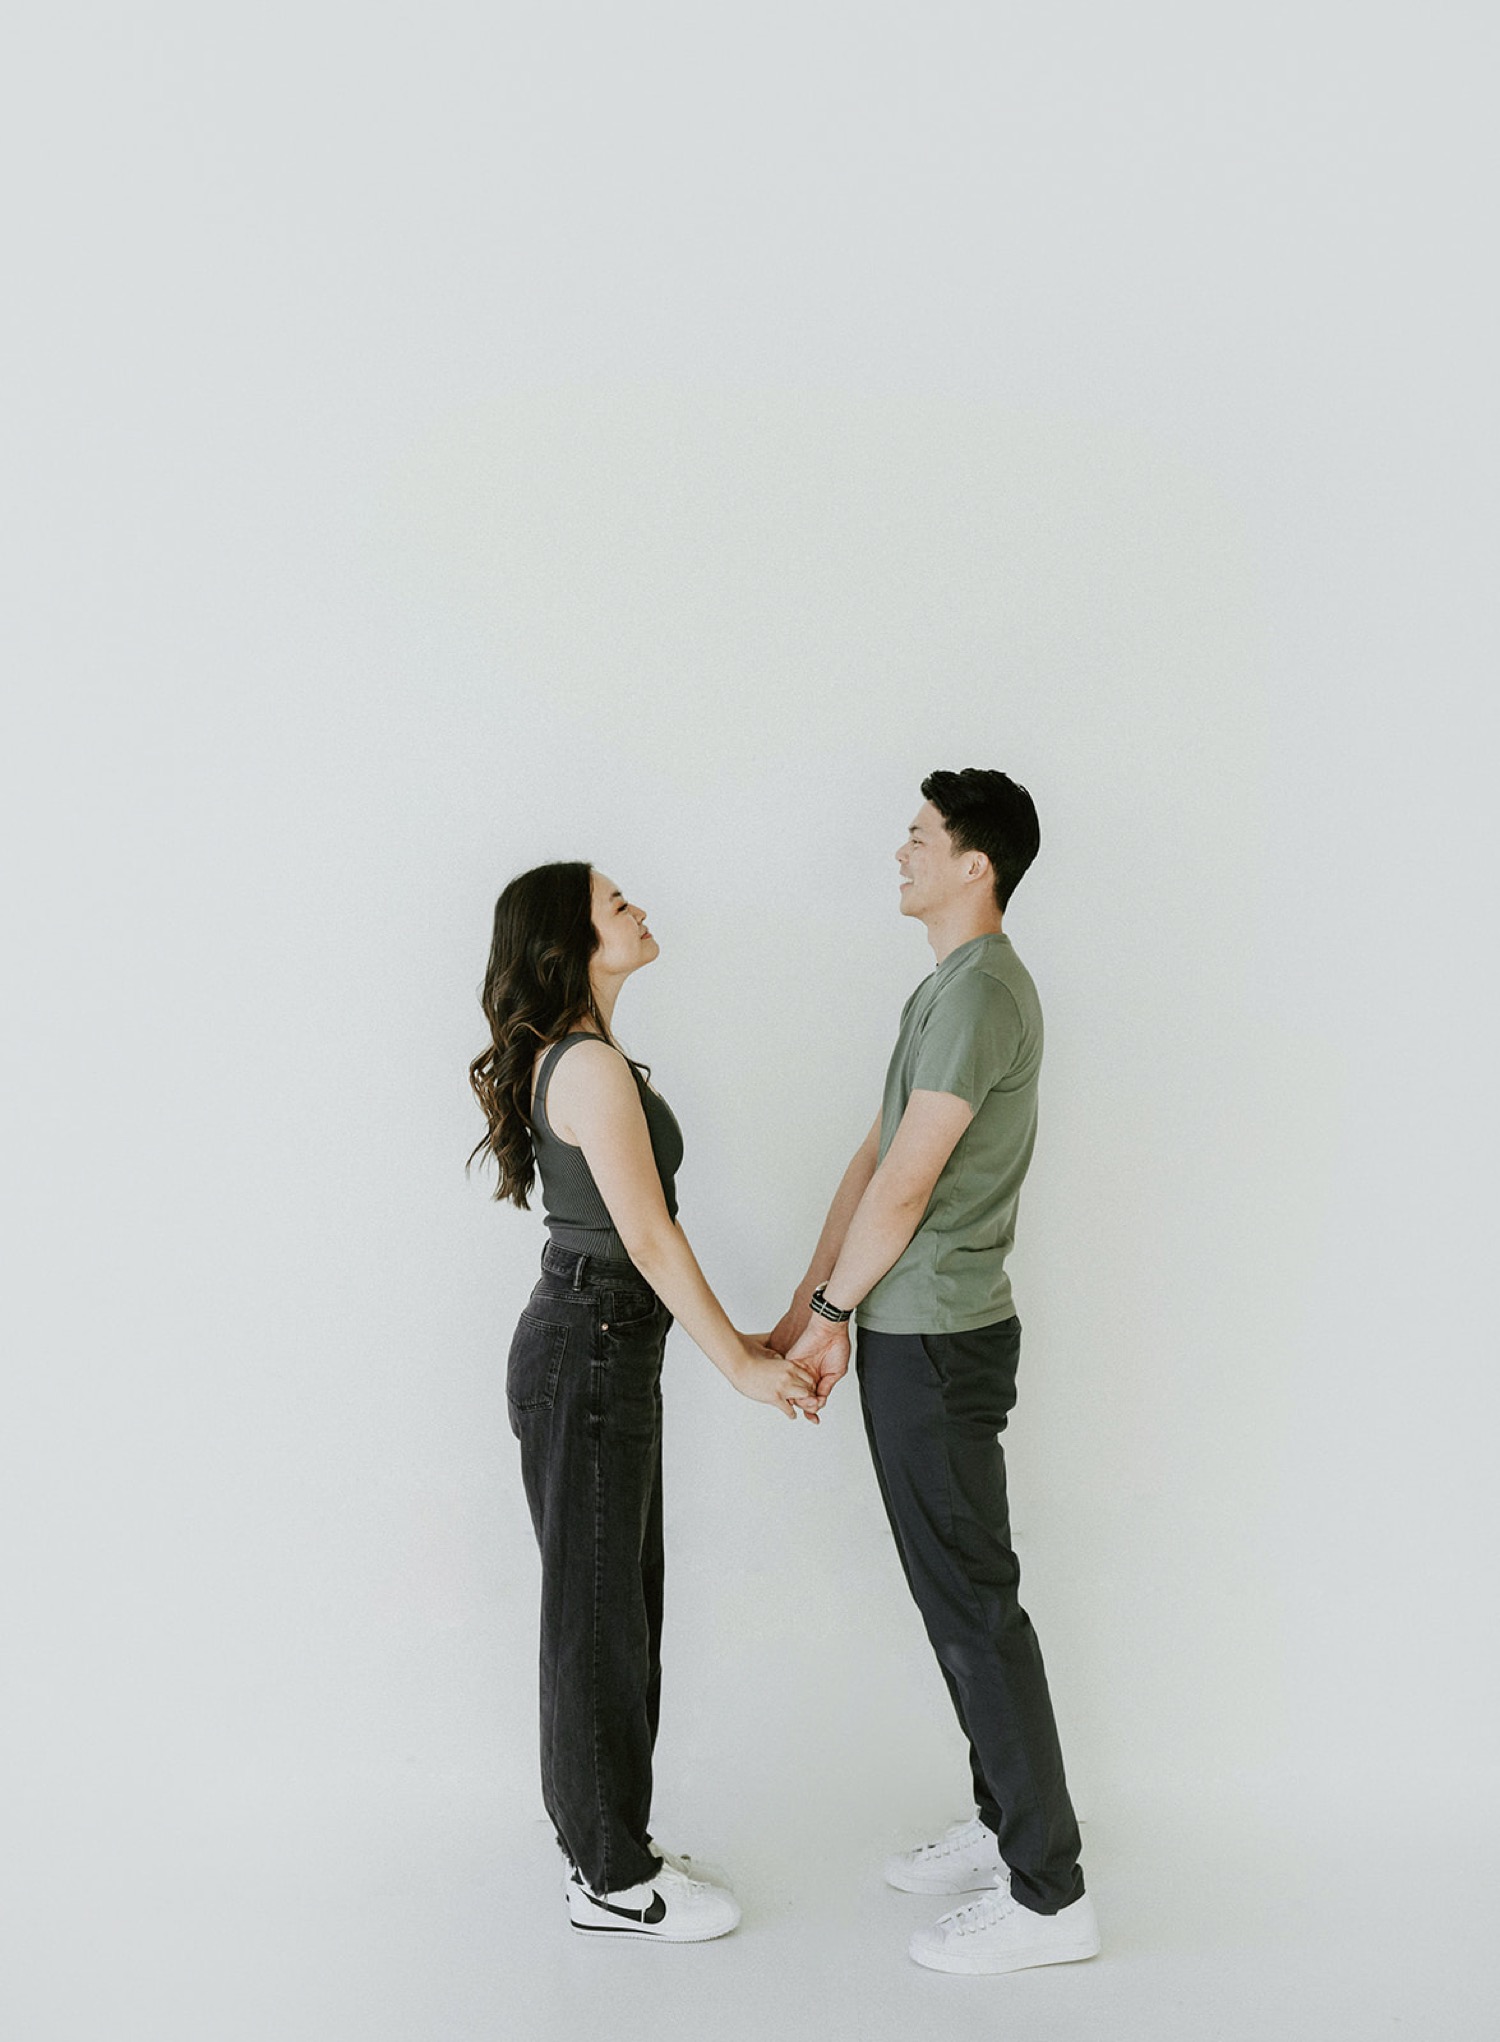 10,938 Couple Studio Shoot Royalty-Free Photos and Stock Images |  Shutterstock